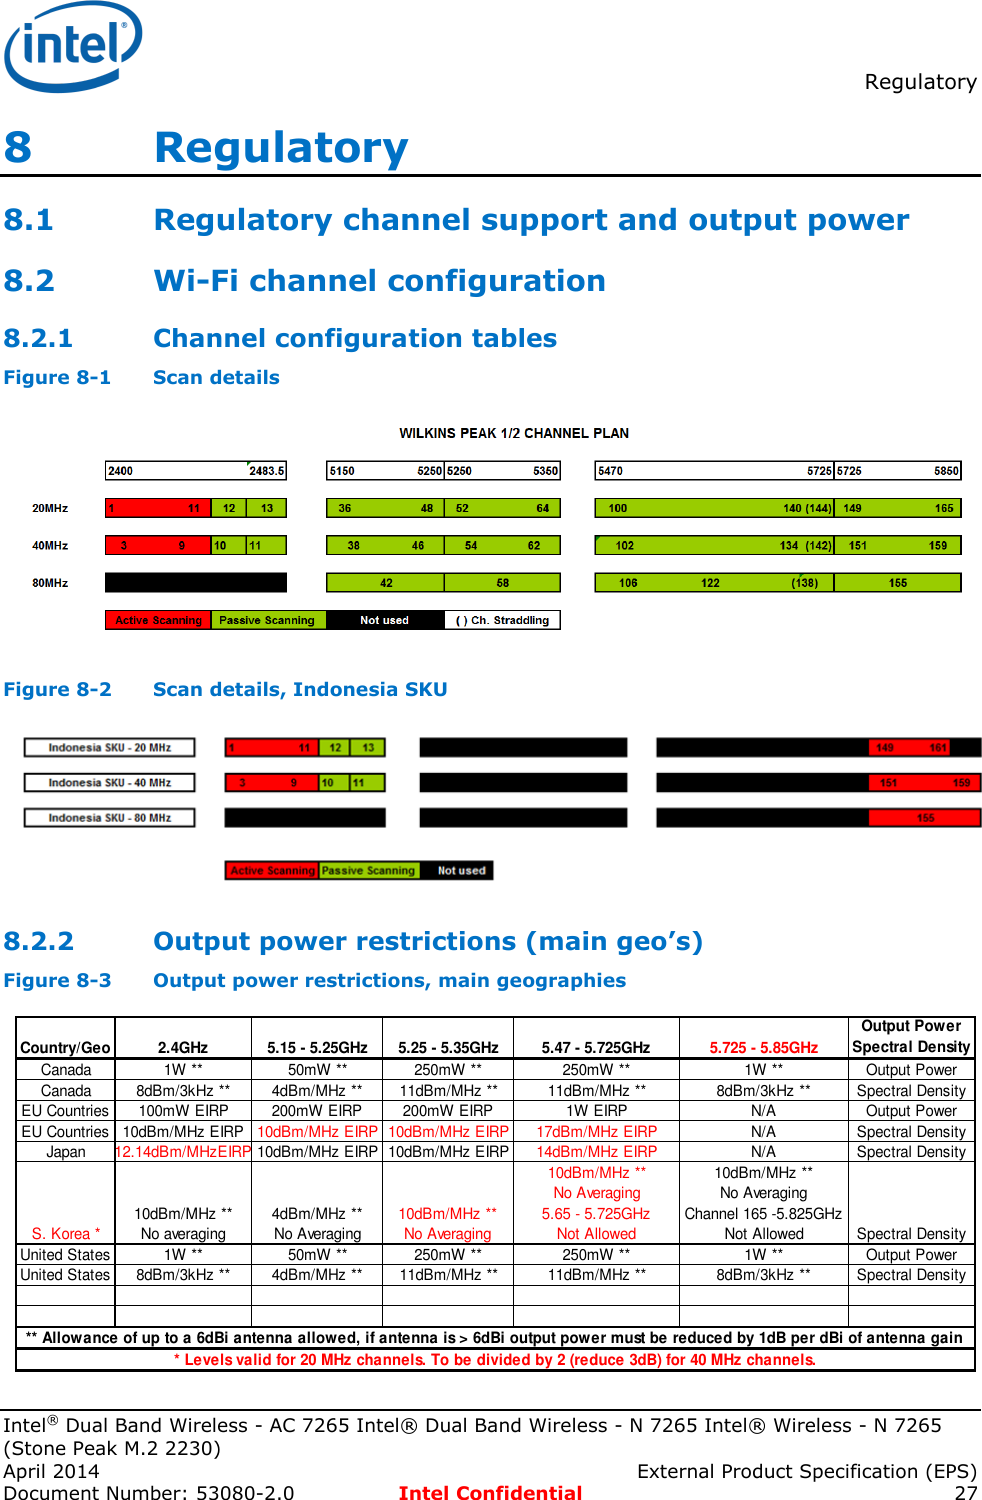  Regulatory  Intel® Dual Band Wireless - AC 7265 Intel® Dual Band Wireless - N 7265 Intel® Wireless - N 7265 (Stone Peak M.2 2230) April 2014    External Product Specification (EPS) Document Number: 53080-2.0  Intel Confidential 27 8   Regulatory 8.1 Regulatory channel support and output power 8.2 Wi-Fi channel configuration 8.2.1 Channel configuration tables Figure 8-1  Scan details  Figure 8-2  Scan details, Indonesia SKU  8.2.2 Output power restrictions (main geo’s) Figure 8-3  Output power restrictions, main geographies  Country/Geo 2.4GHz 5.15 - 5.25GHz 5.25 - 5.35GHz 5.47 - 5.725GHz 5.725 - 5.85GHzOutput PowerSpectral DensityCanada 1W ** 50mW ** 250mW ** 250mW ** 1W **Output PowerCanada 8dBm/3kHz ** 4dBm/MHz ** 11dBm/MHz ** 11dBm/MHz ** 8dBm/3kHz **Spectral DensityEU Countries 100mW EIRP 200mW EIRP 200mW EIRP 1W EIRP N/AOutput PowerEU Countries 10dBm/MHz EIRP 10dBm/MHz EIRP 10dBm/MHz EIRP 17dBm/MHz EIRP N/A Spectral DensityJapan12.14dBm/MHzEIRP10dBm/MHz EIRP 10dBm/MHz EIRP 14dBm/MHz EIRP N/A Spectral DensityS. Korea *10dBm/MHz **No averaging4dBm/MHz **No Averaging10dBm/MHz **No Averaging10dBm/MHz **No Averaging5.65 - 5.725GHzNot Allowed10dBm/MHz **No AveragingChannel 165 -5.825GHzNot AllowedSpectral DensityUnited States 1W ** 50mW ** 250mW ** 250mW ** 1W **Output PowerUnited States 8dBm/3kHz ** 4dBm/MHz ** 11dBm/MHz ** 11dBm/MHz ** 8dBm/3kHz **Spectral Density** Allowance of up to a 6dBi antenna allowed, if antenna is &gt; 6dBi output power must be reduced by 1dB per dBi of antenna gain* Levels valid for 20 MHz channels. To be divided by 2 (reduce 3dB) for 40 MHz channels.